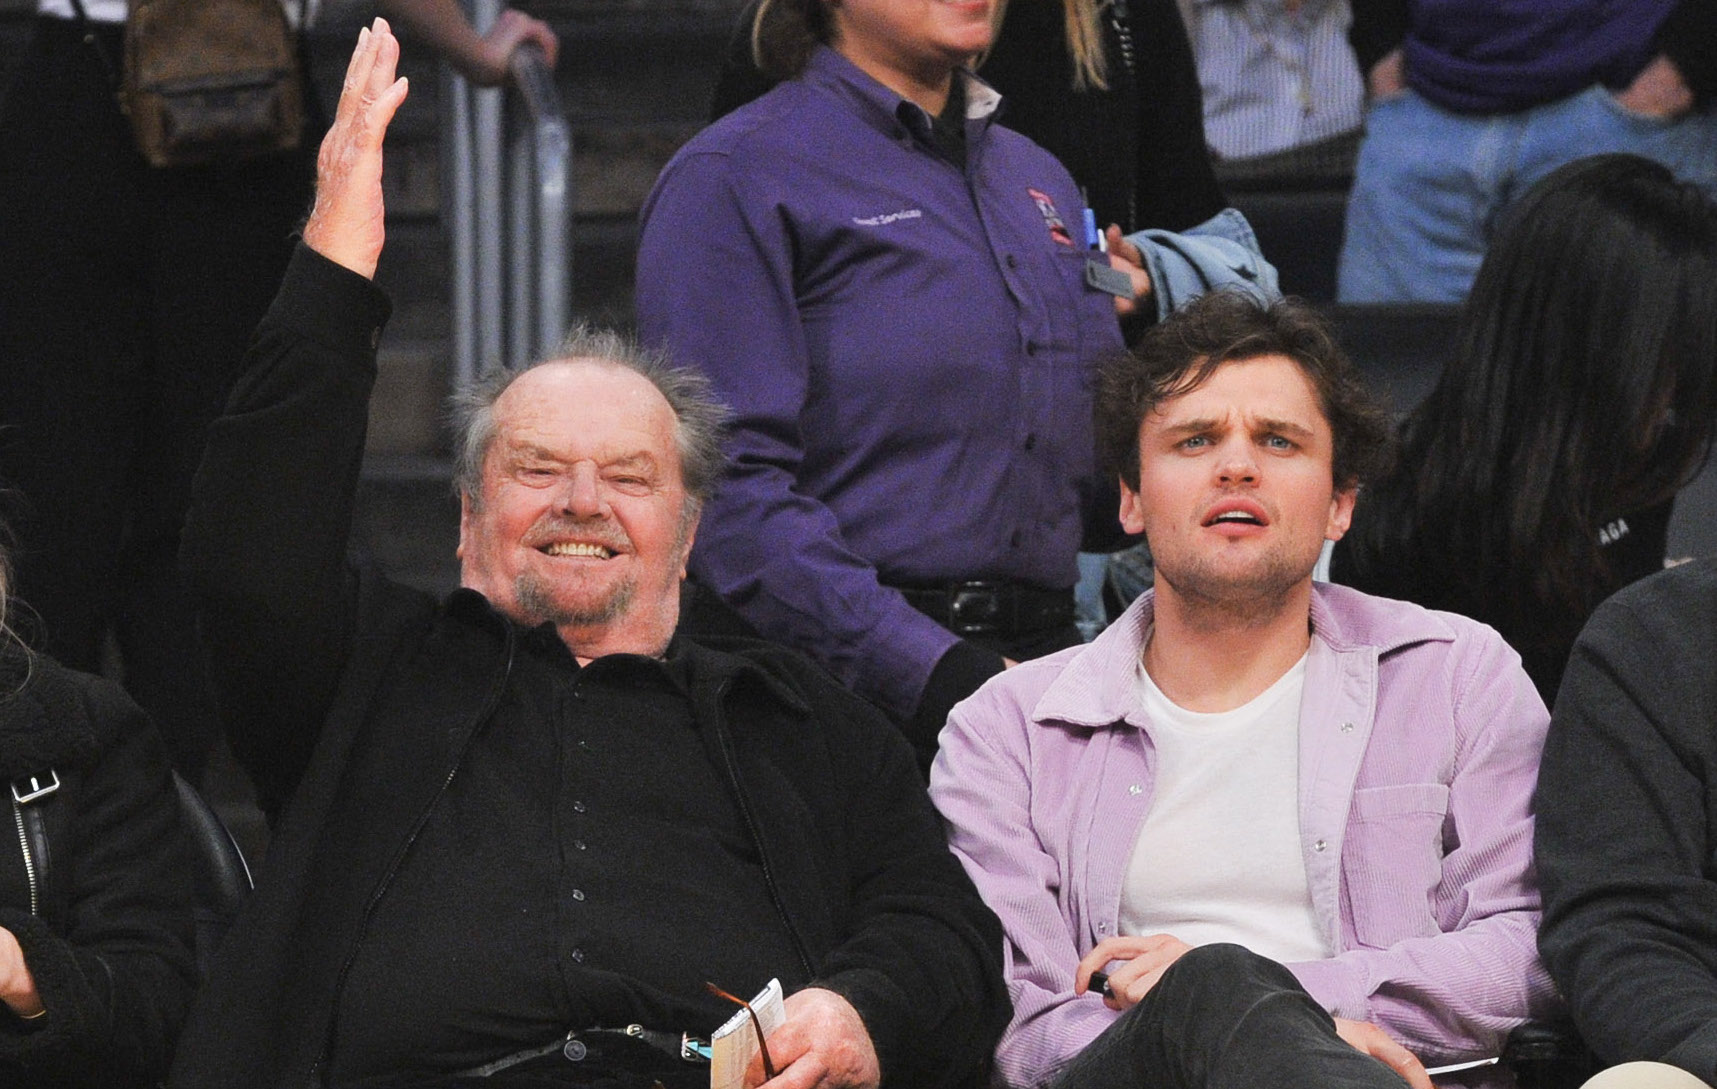 LOOK: Jack Nicholson at Lakers games through the years